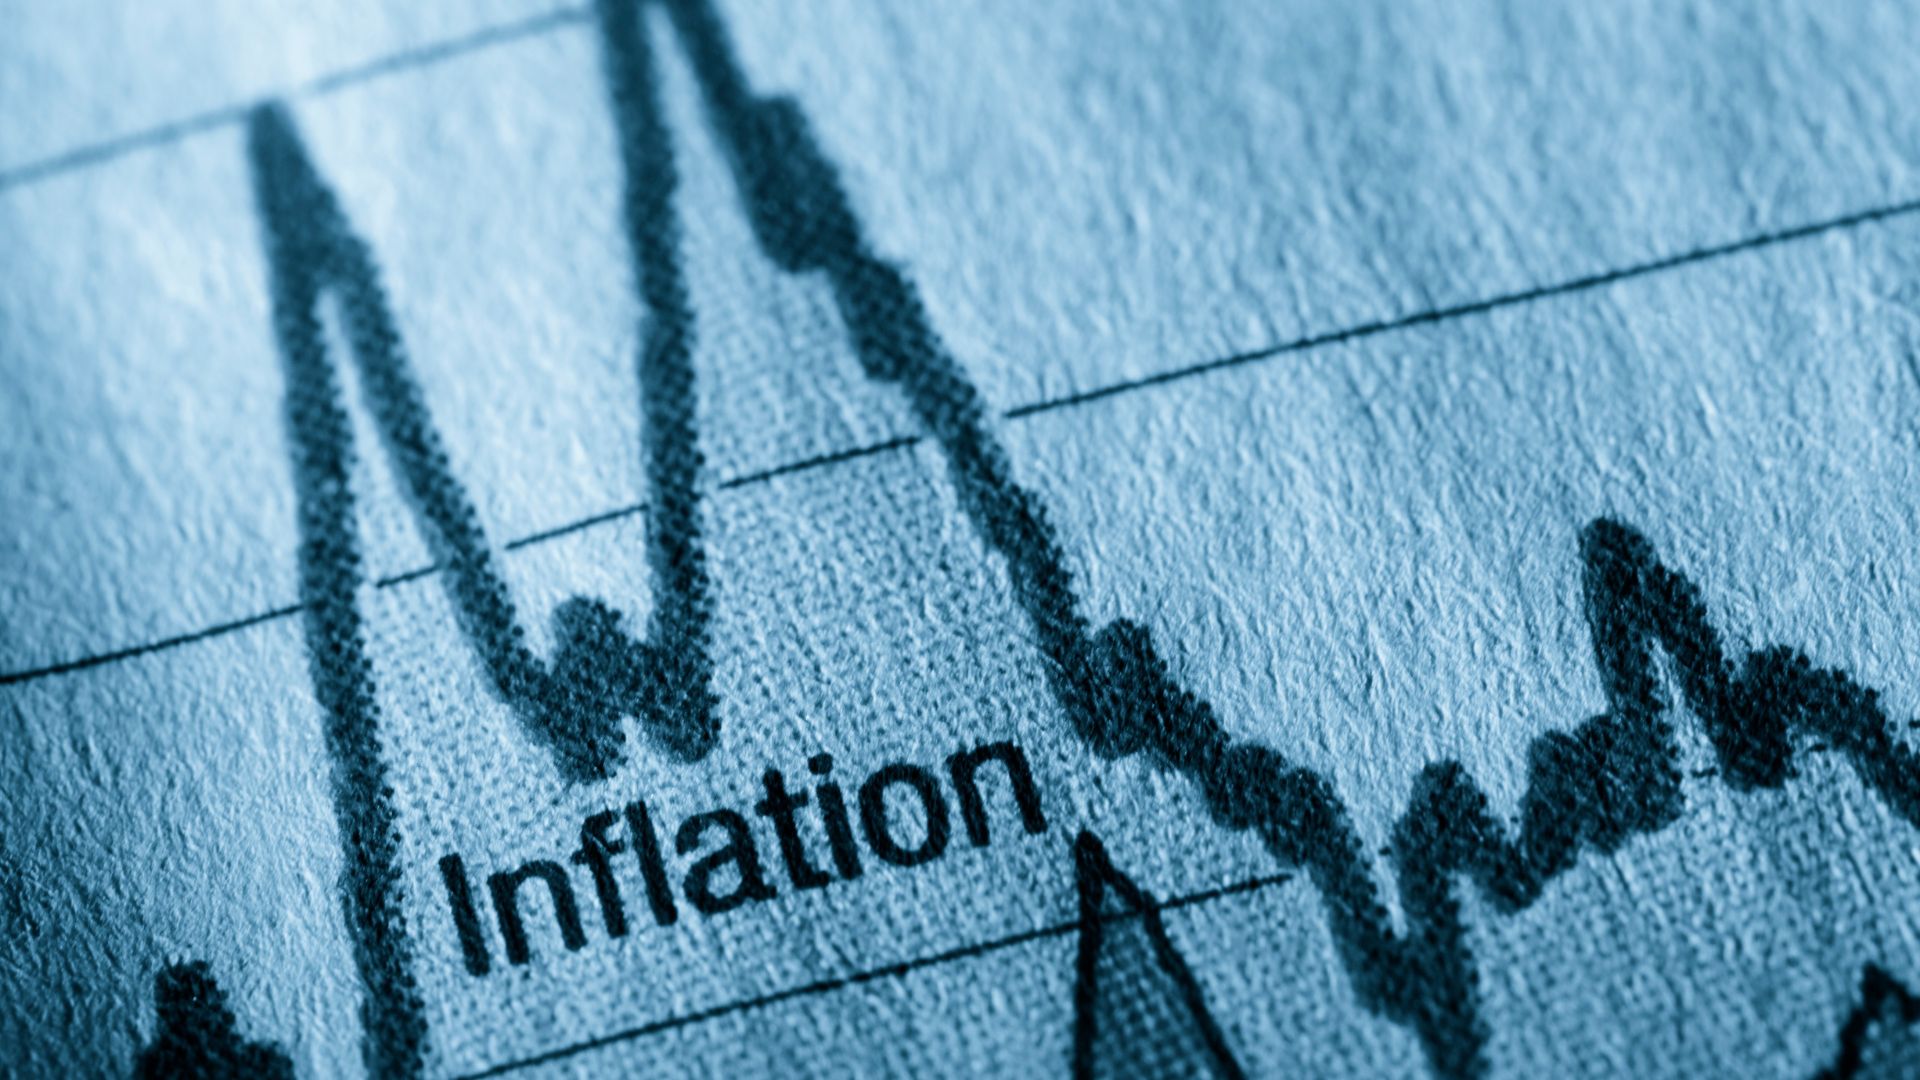 CEBR: Global Effort to Control Inflation will Lead To Recession for World Economy in 2023